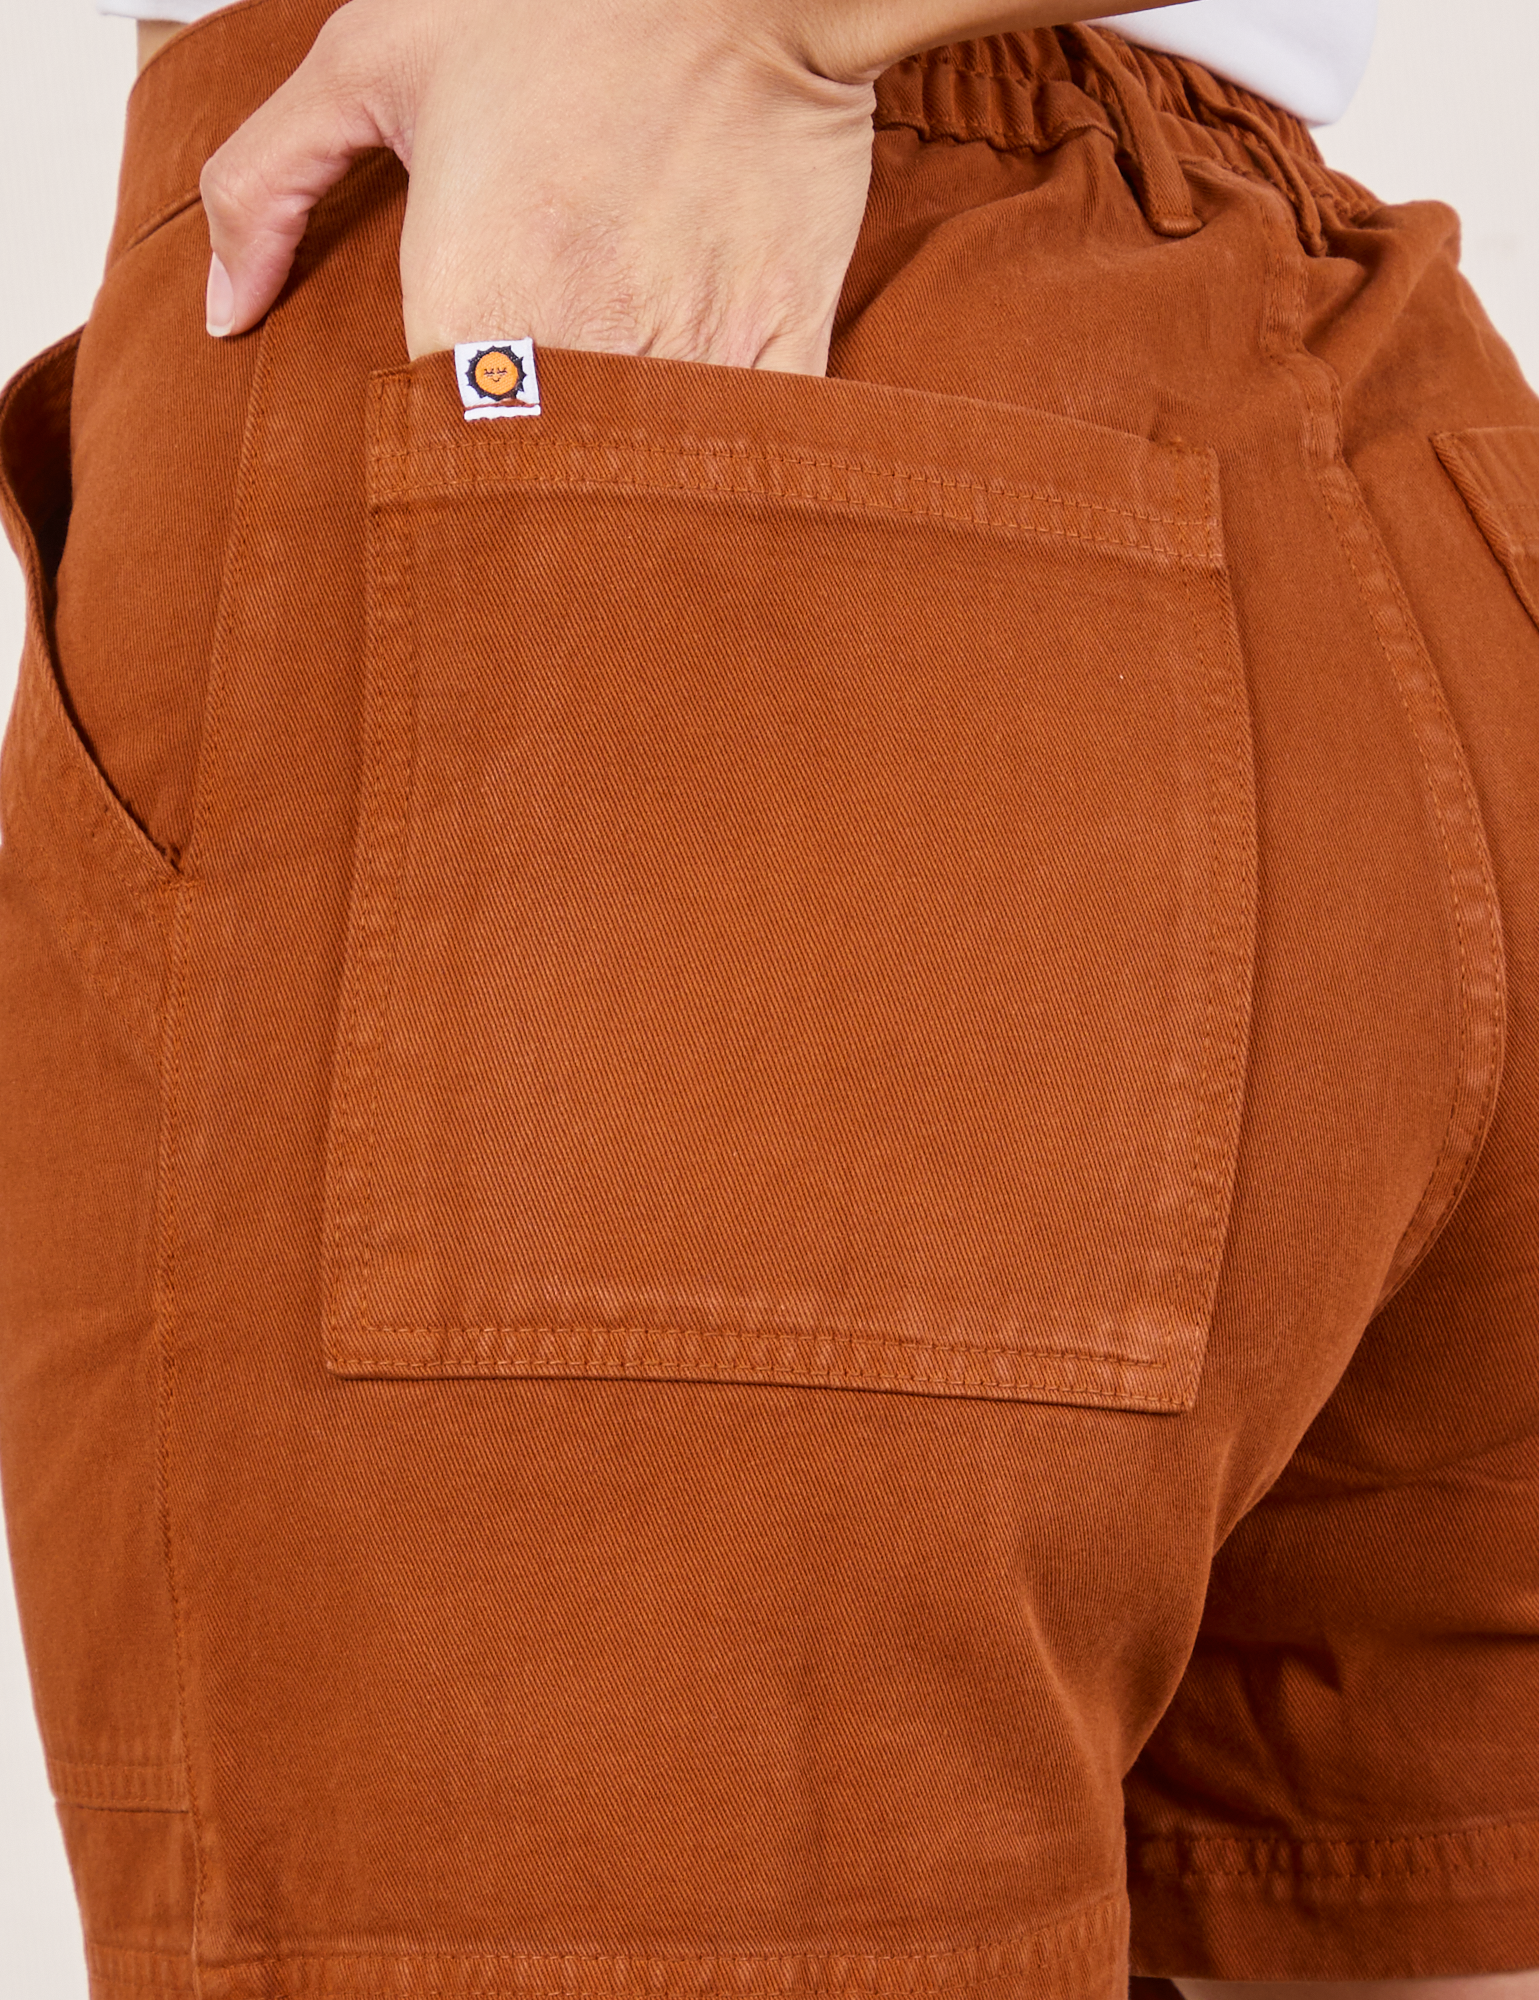 Classic Work Shorts in Burnt Terracotta back pocket close up. Tiara has her hand in the pocket.